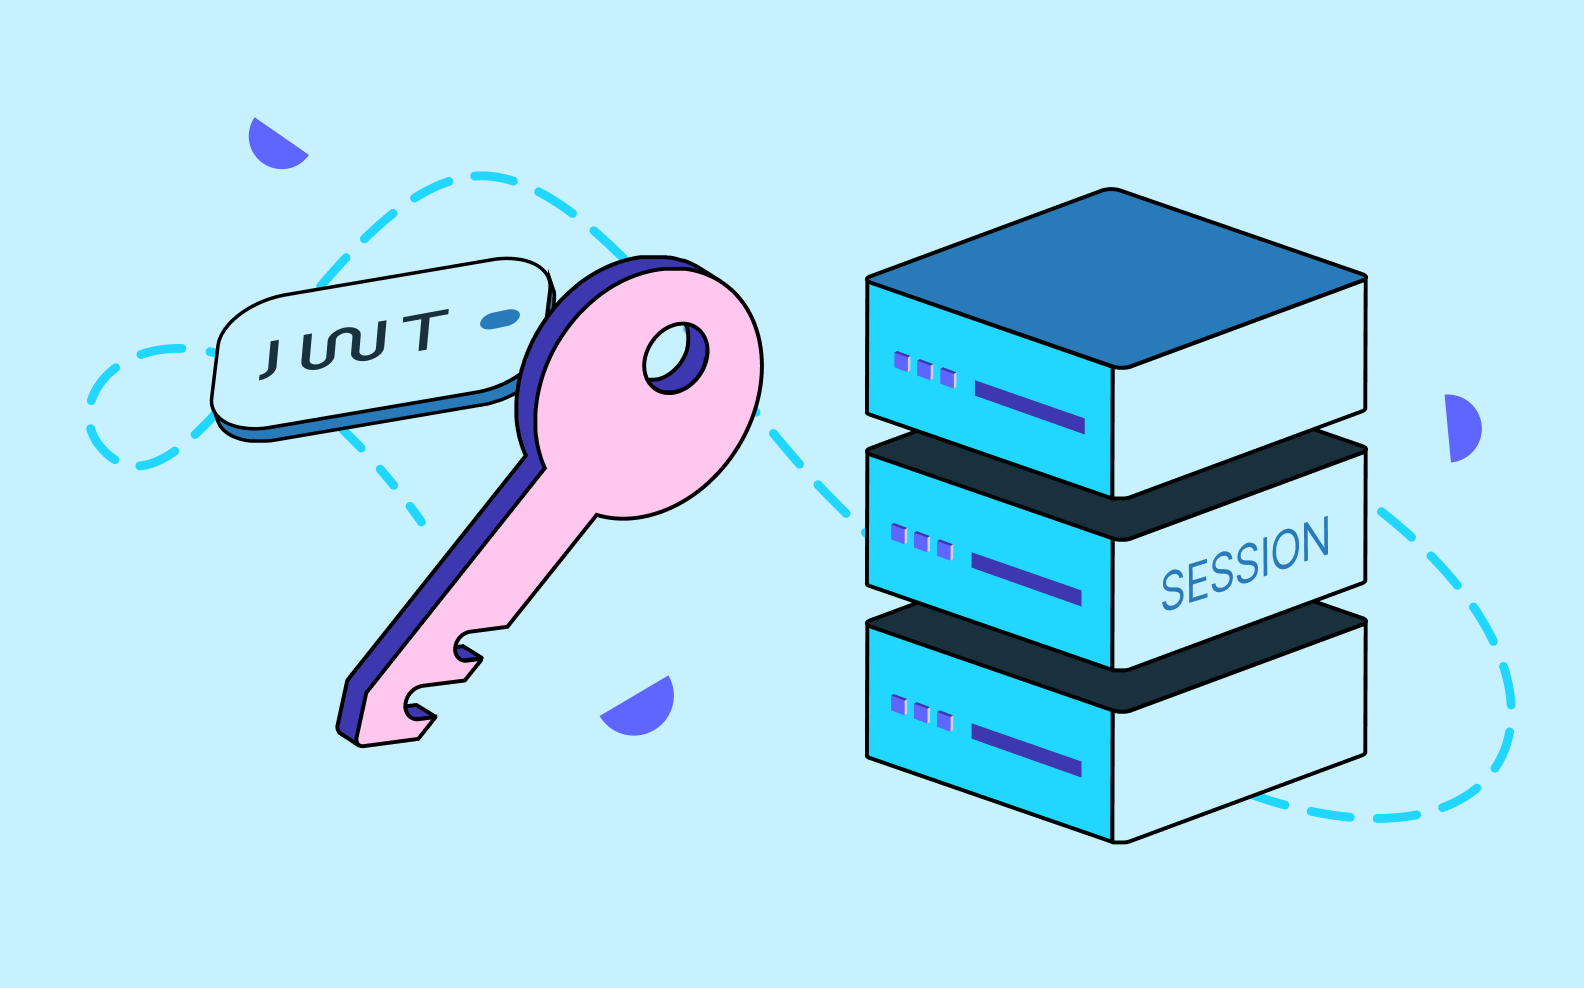 An image of a key that says "JWT" and a tech stack that says "Sessions"